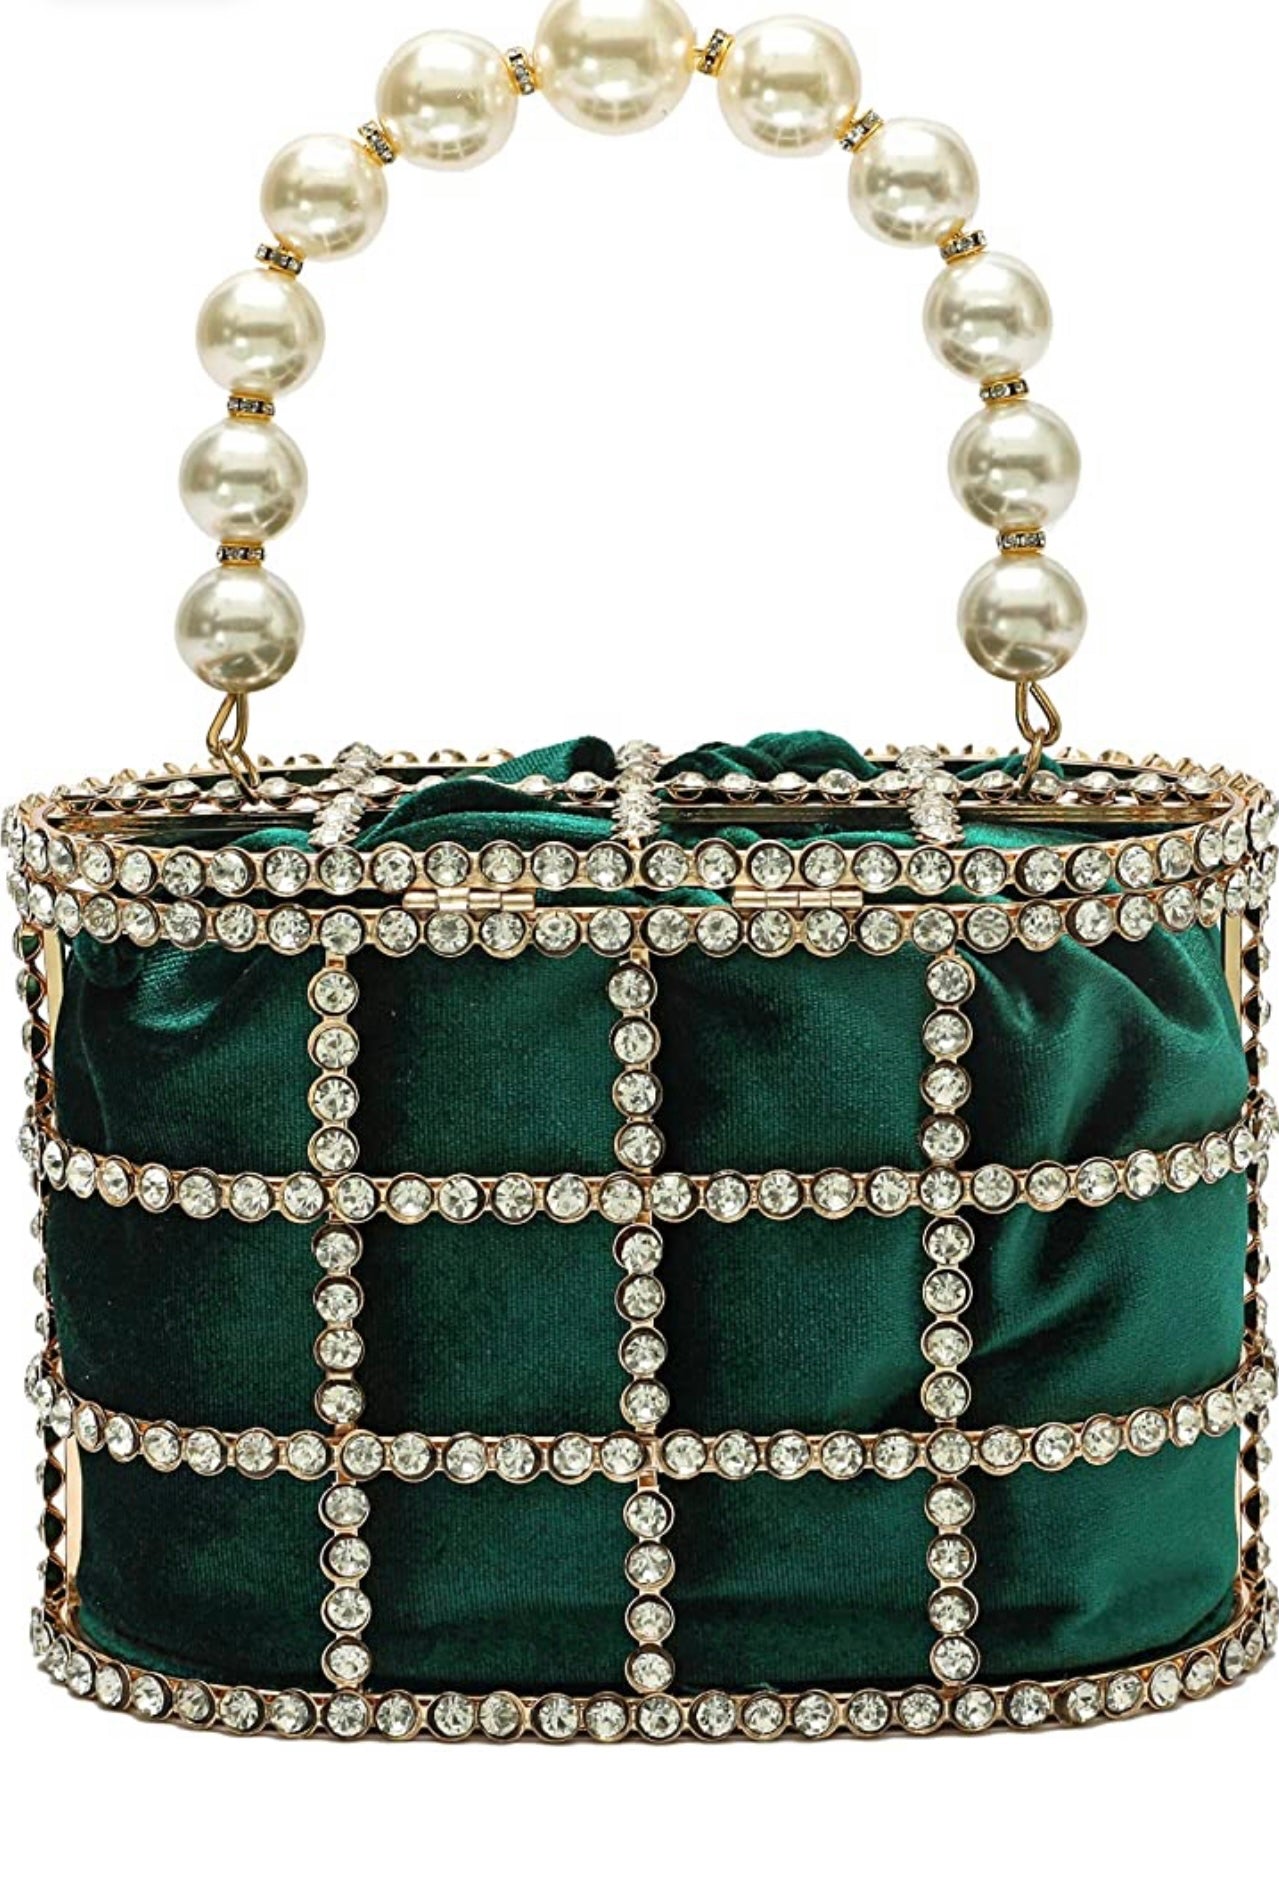 Shop the Traditional Green Bandhani Clutch with Hand-Embroidered Sequins |  Exquisite Design – ParrotHue